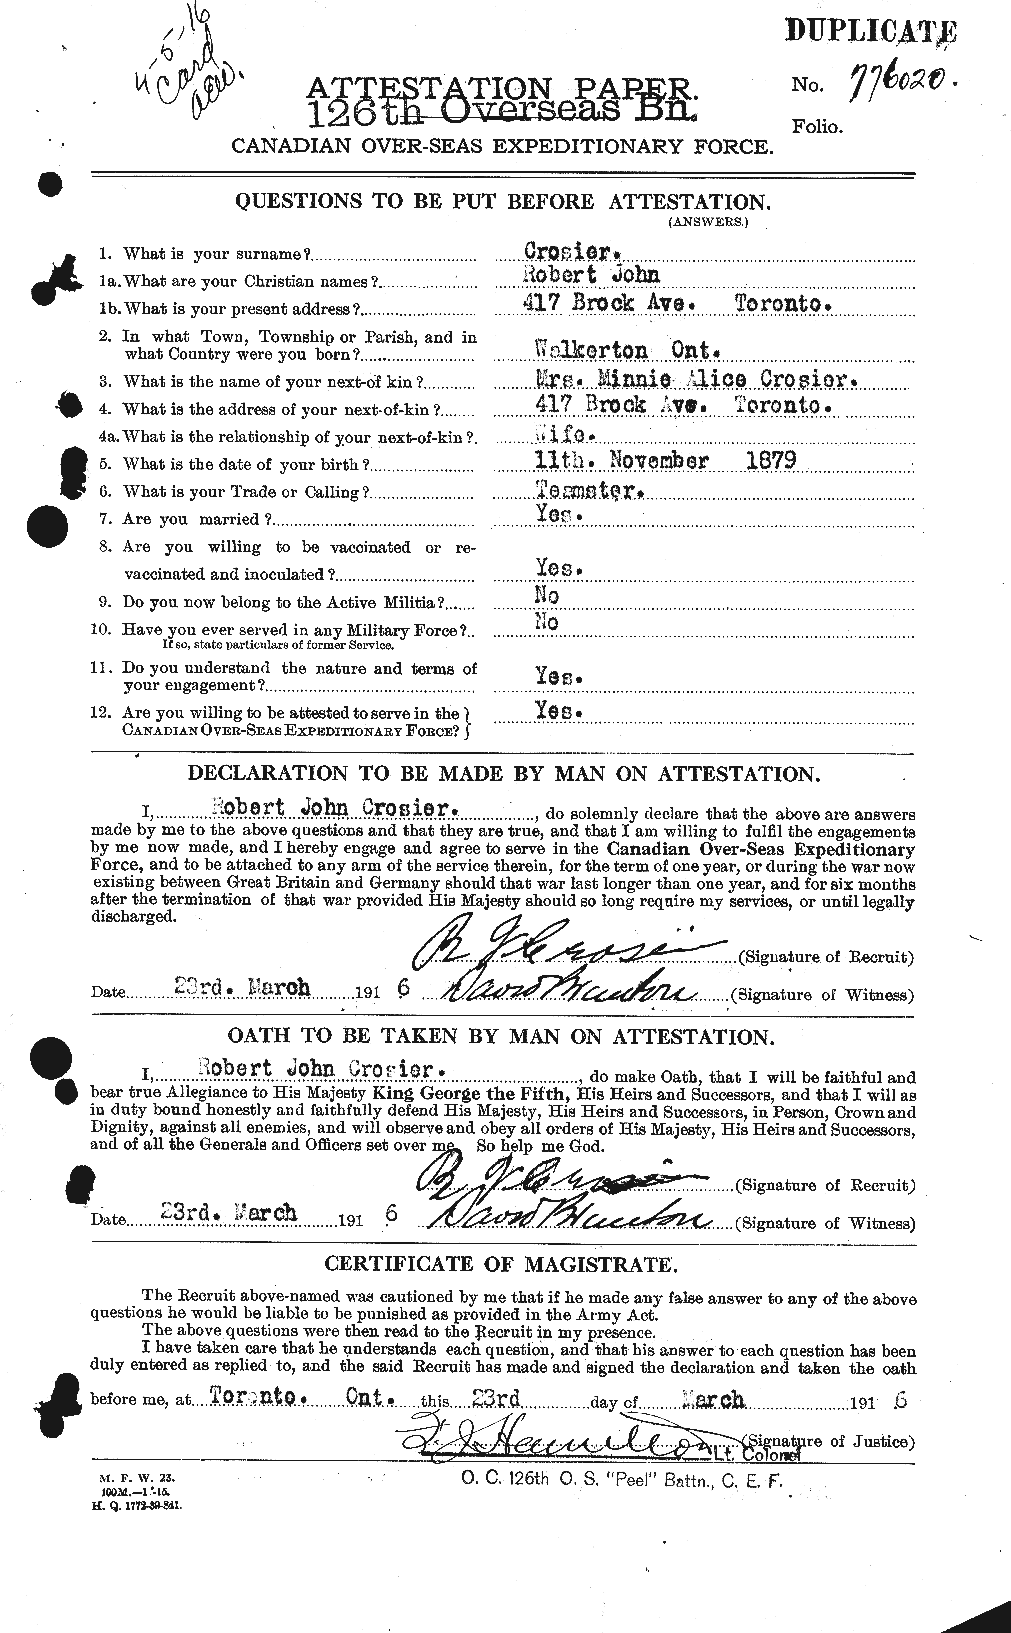 Personnel Records of the First World War - CEF 065775a